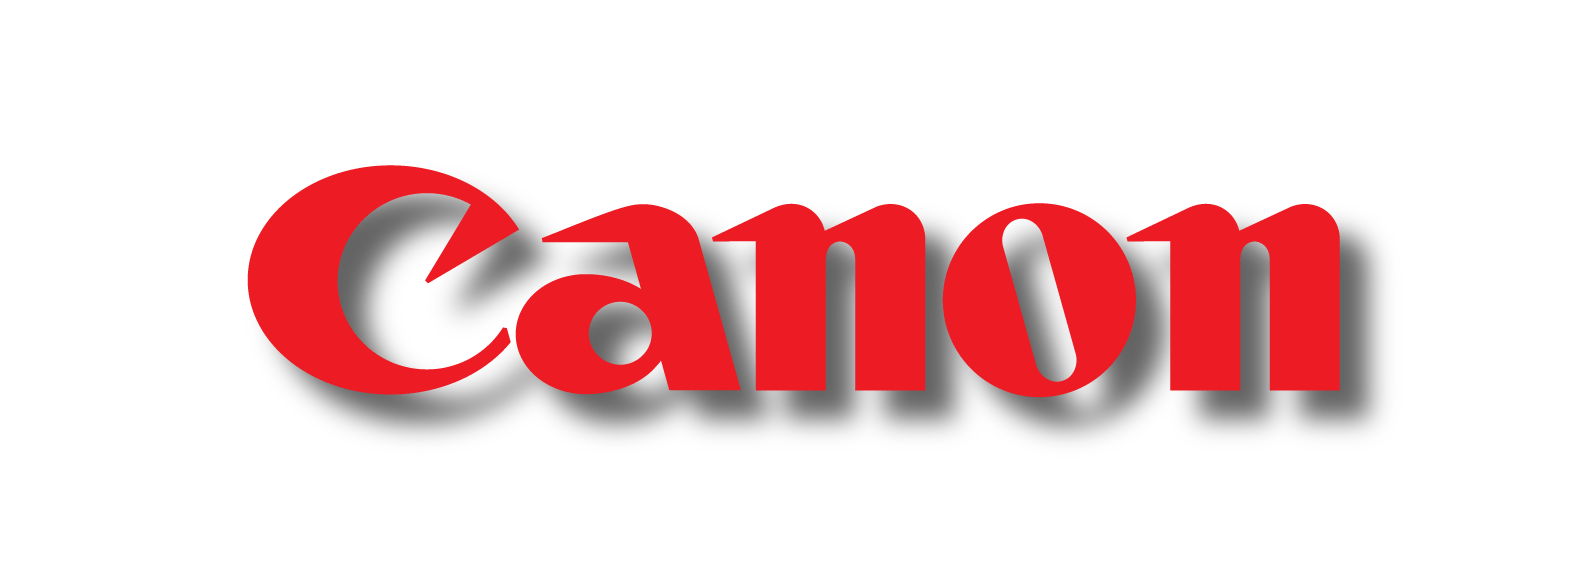 Canon Printer Logo - Canon launches ink refillable printer range in India - The Unbiased Blog